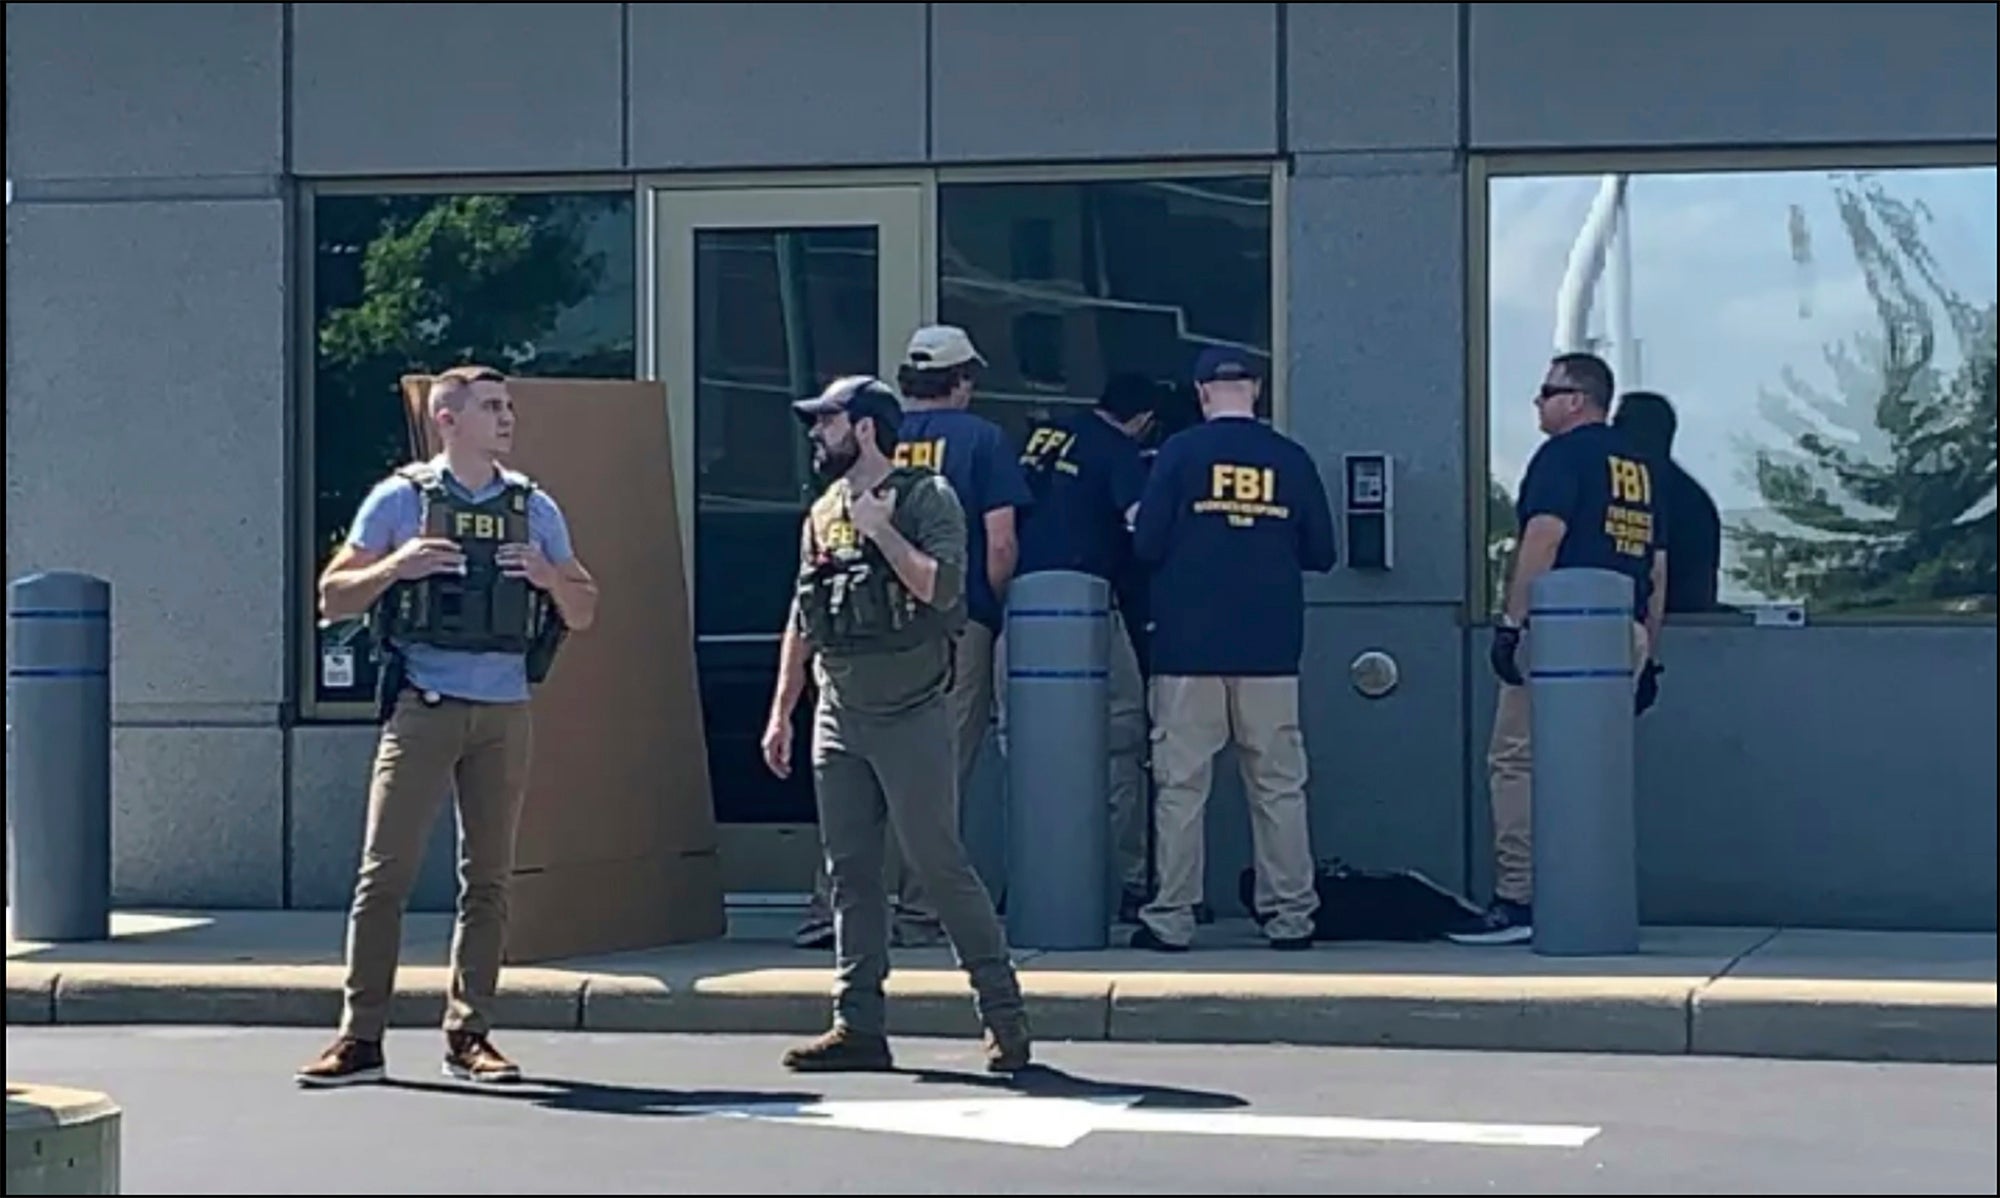 Officials gather outside the FBI building in Cincinnati, after Shiffer attempted to breach the building